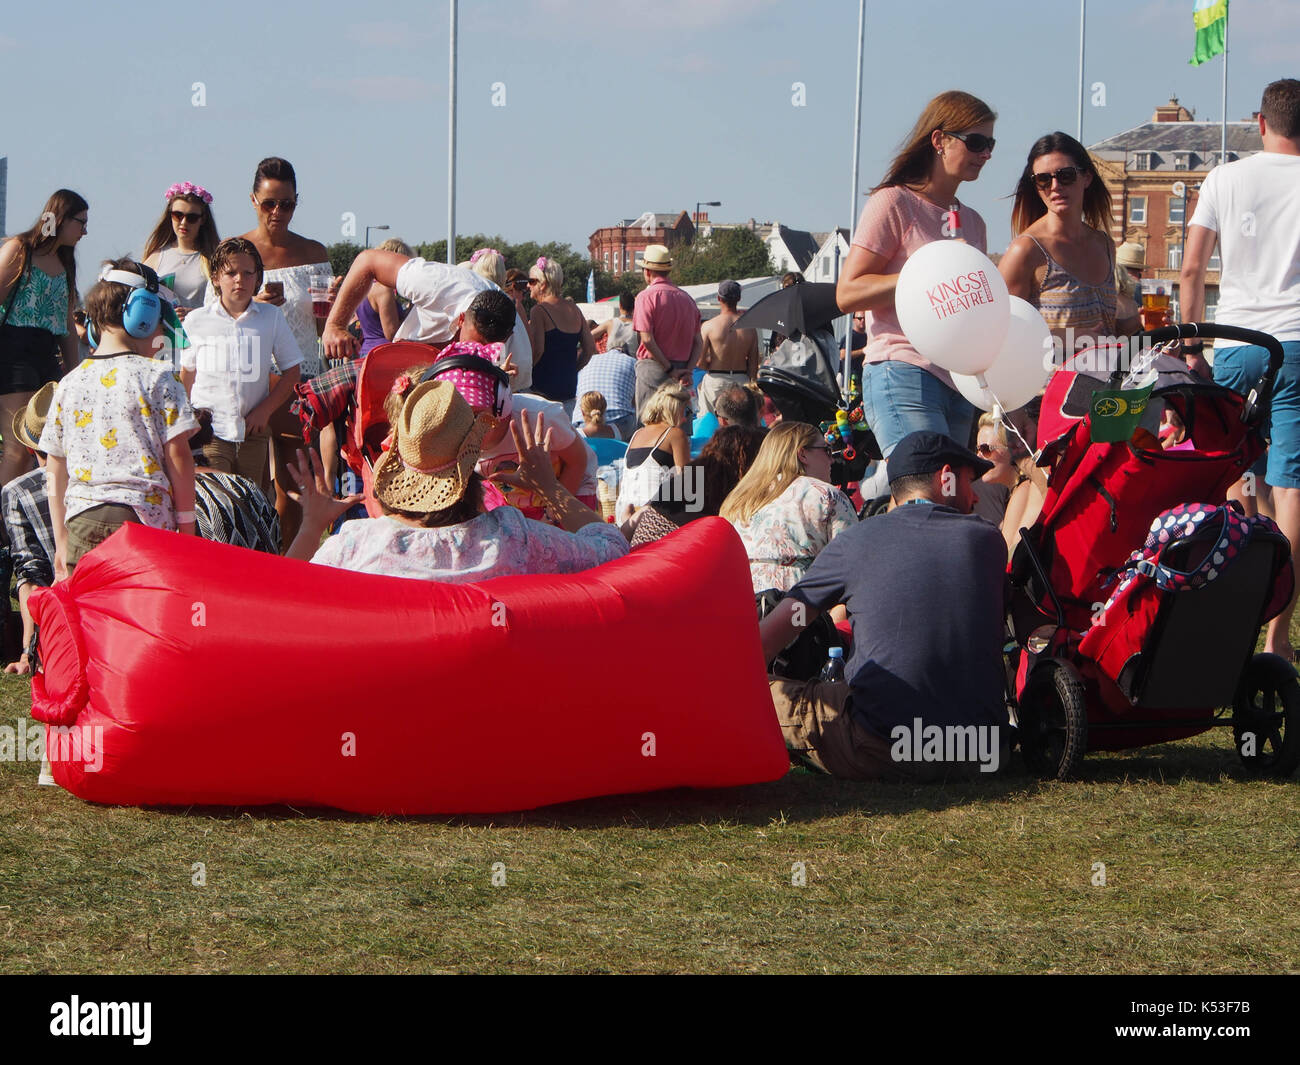 people sitting on an inflatable air bag at an outdoor festival Stock Photo